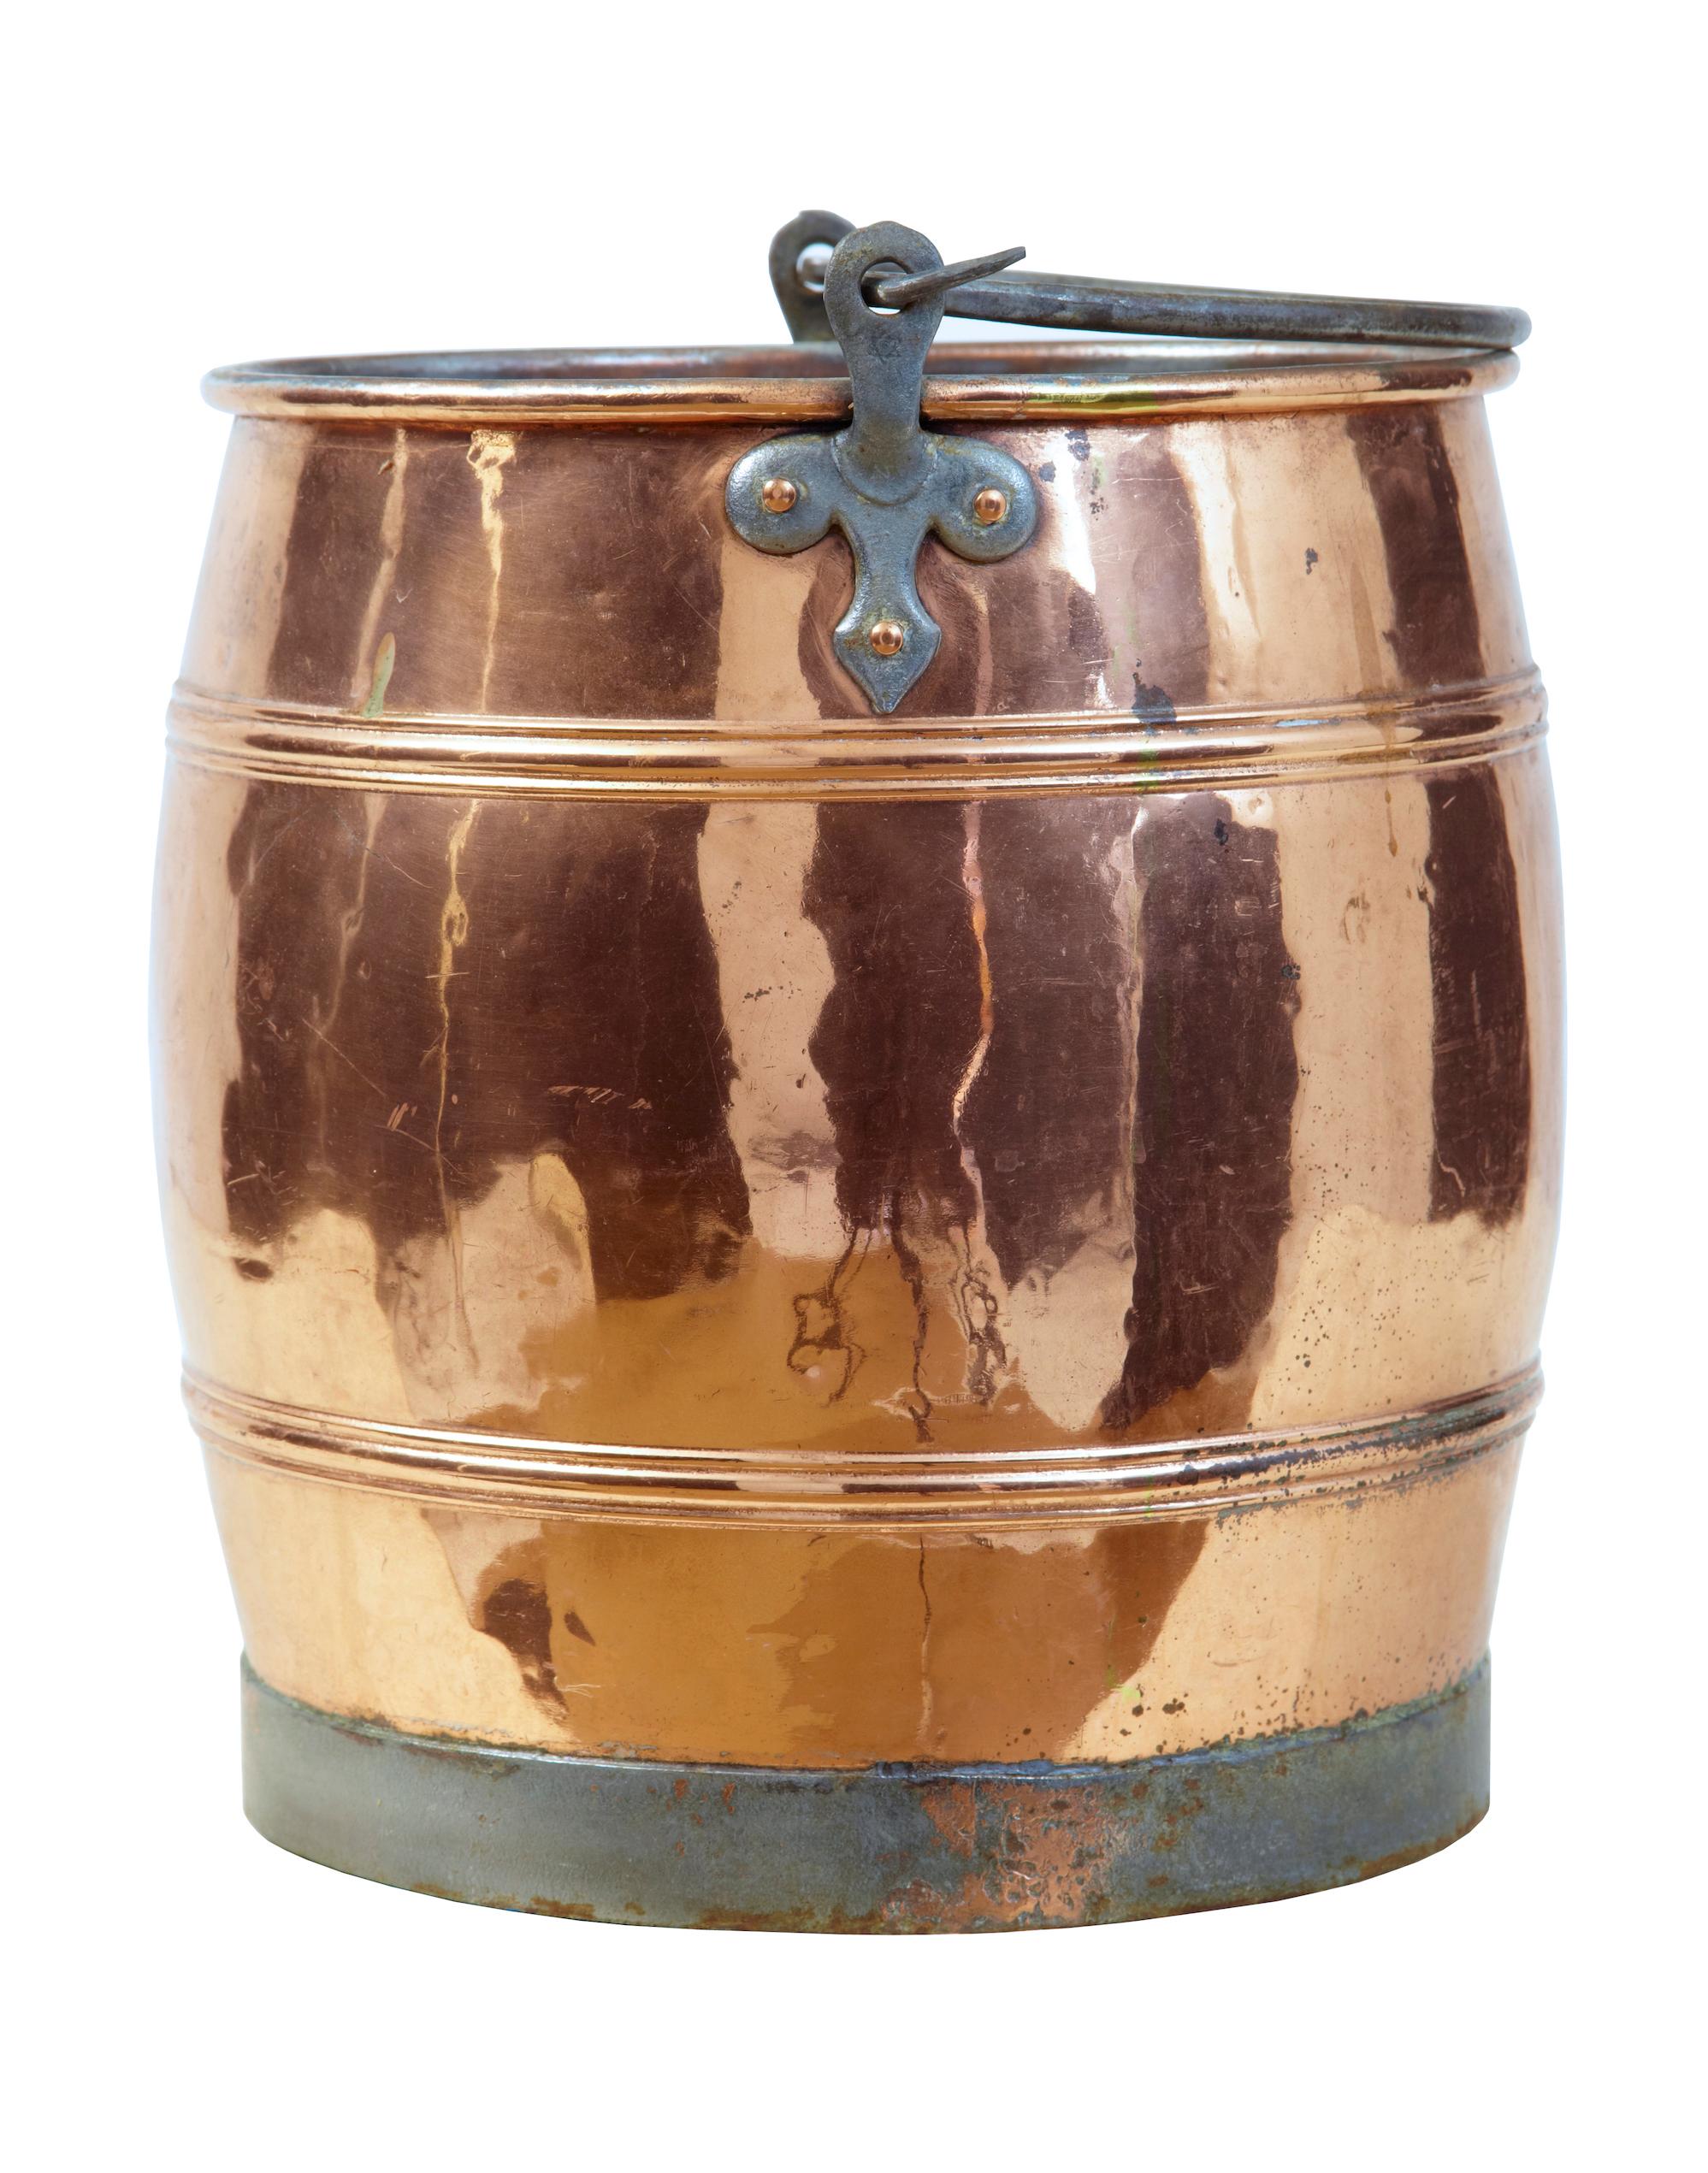 Arts & Crafts Scandinavian copper bucket, circa 1890.

Good quality keg barrel shaped copper pail, with steel handle and bottom rim. Ideal for use as a log bin or waste paper basket.

Expected surface marks.